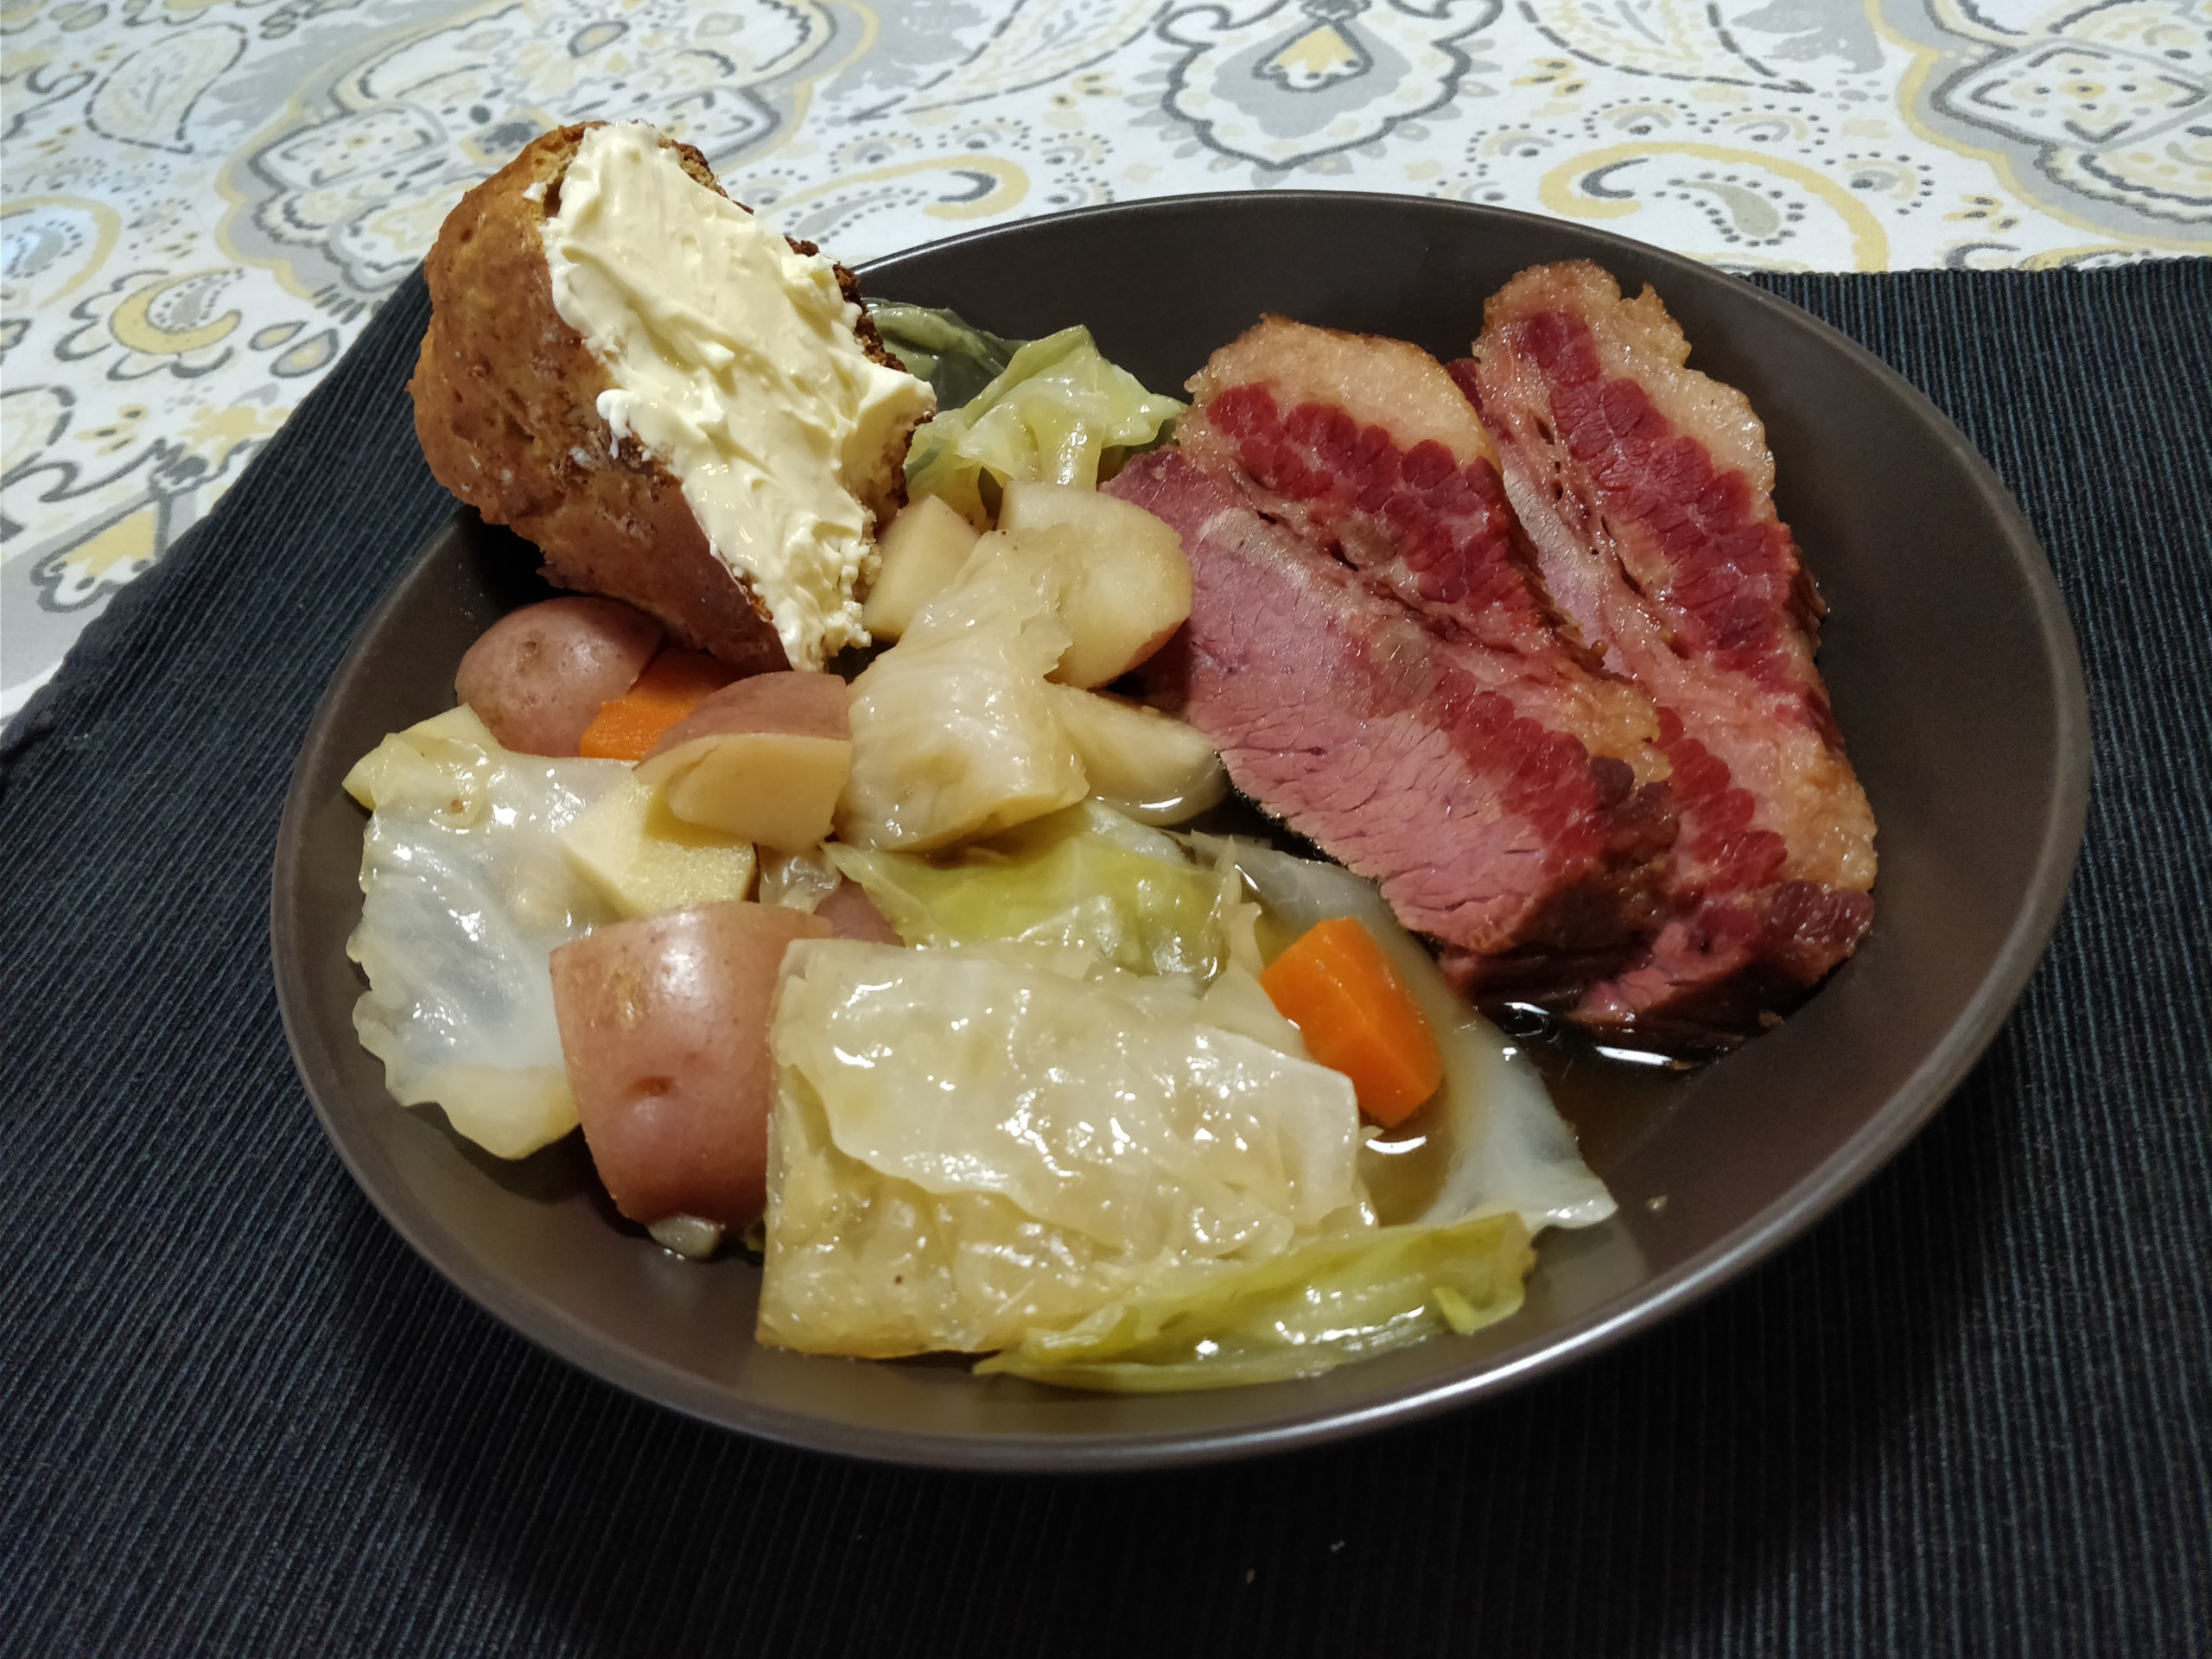 plate of corned beef, cabbage, potatoes, carrots, parsnip, and heavily-buttered soda bread